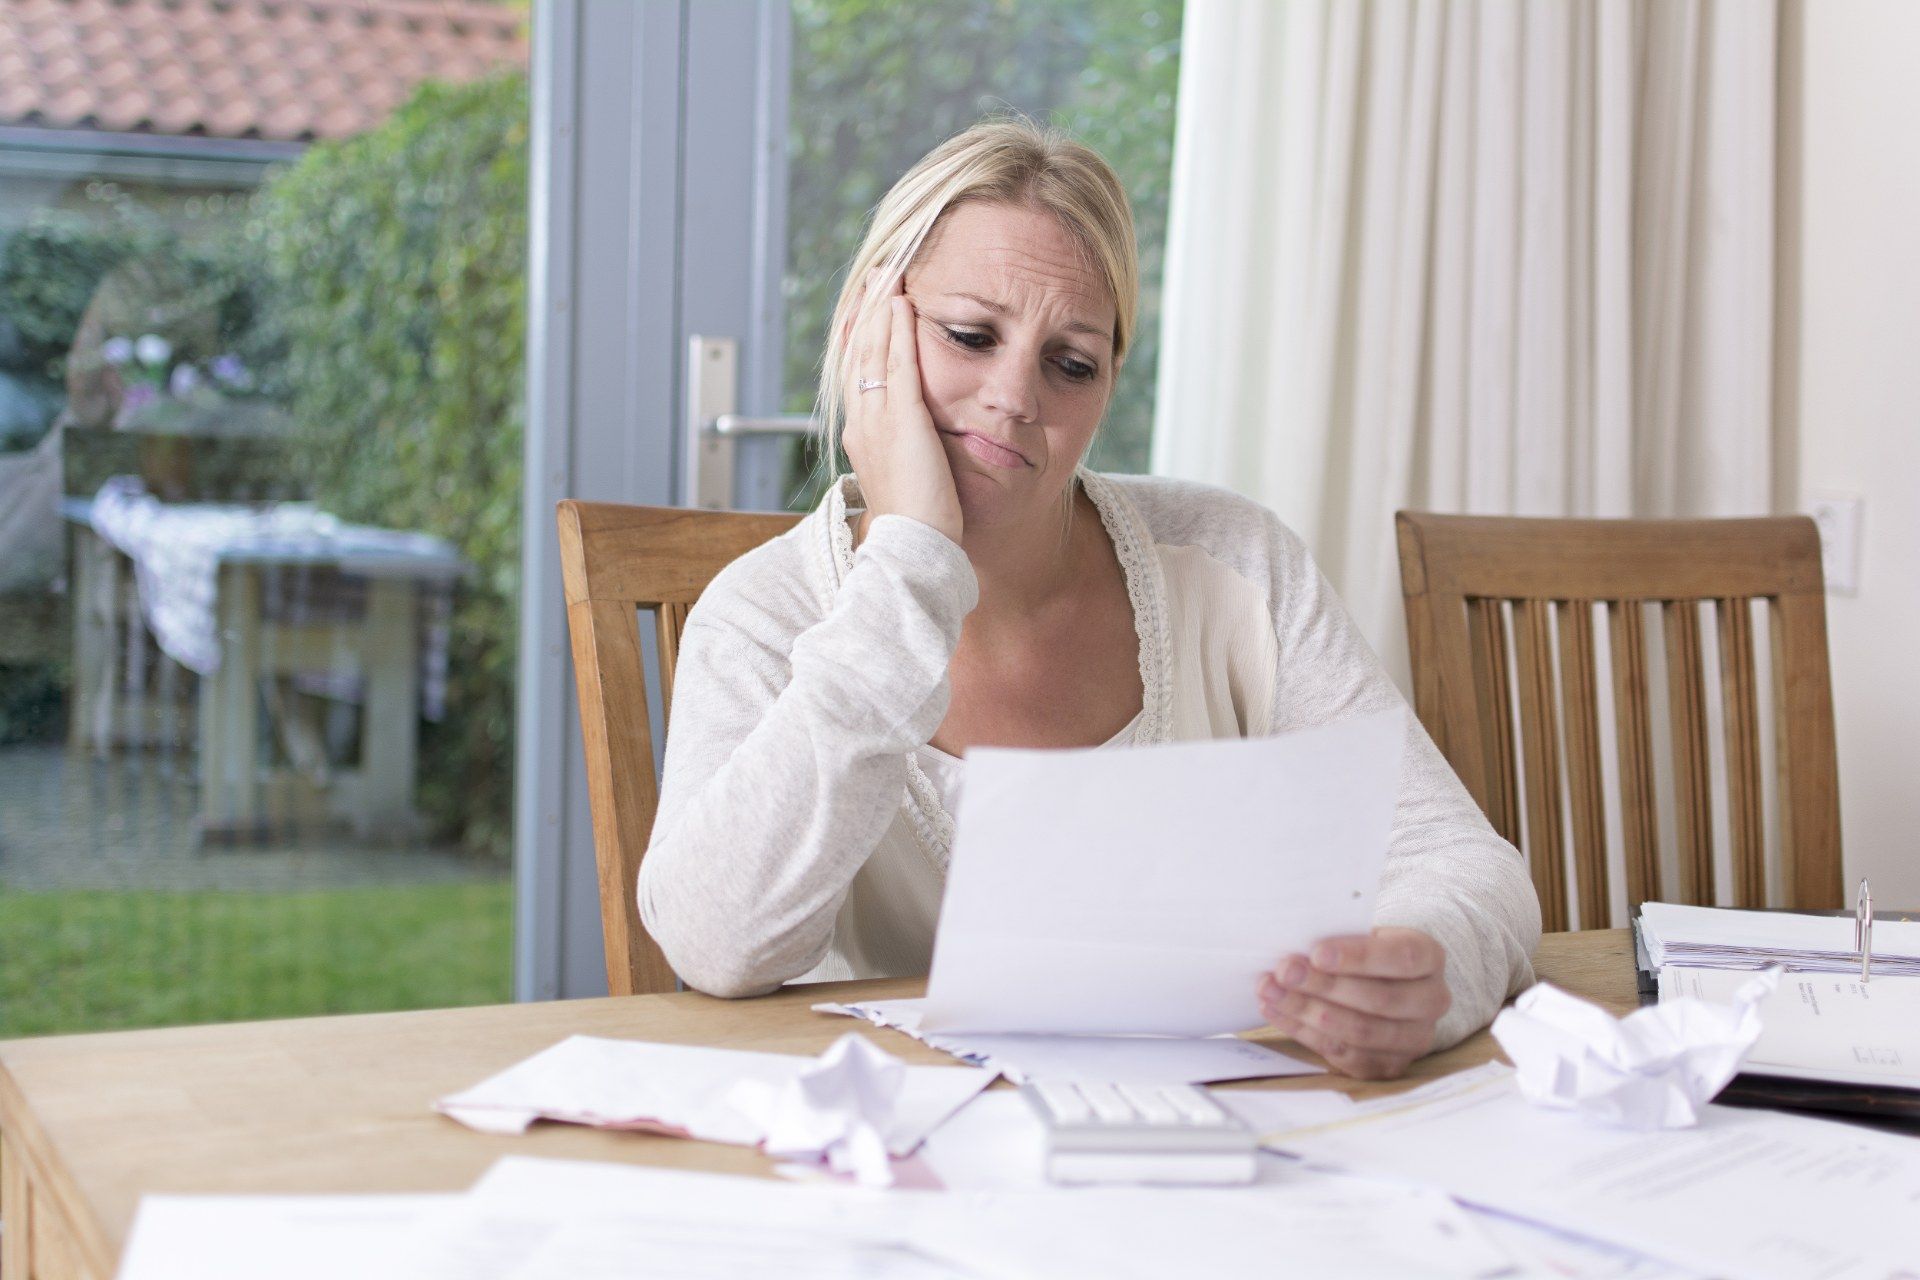 Woman holds paper at kitchen table with papers strewn around - mortgage holiday